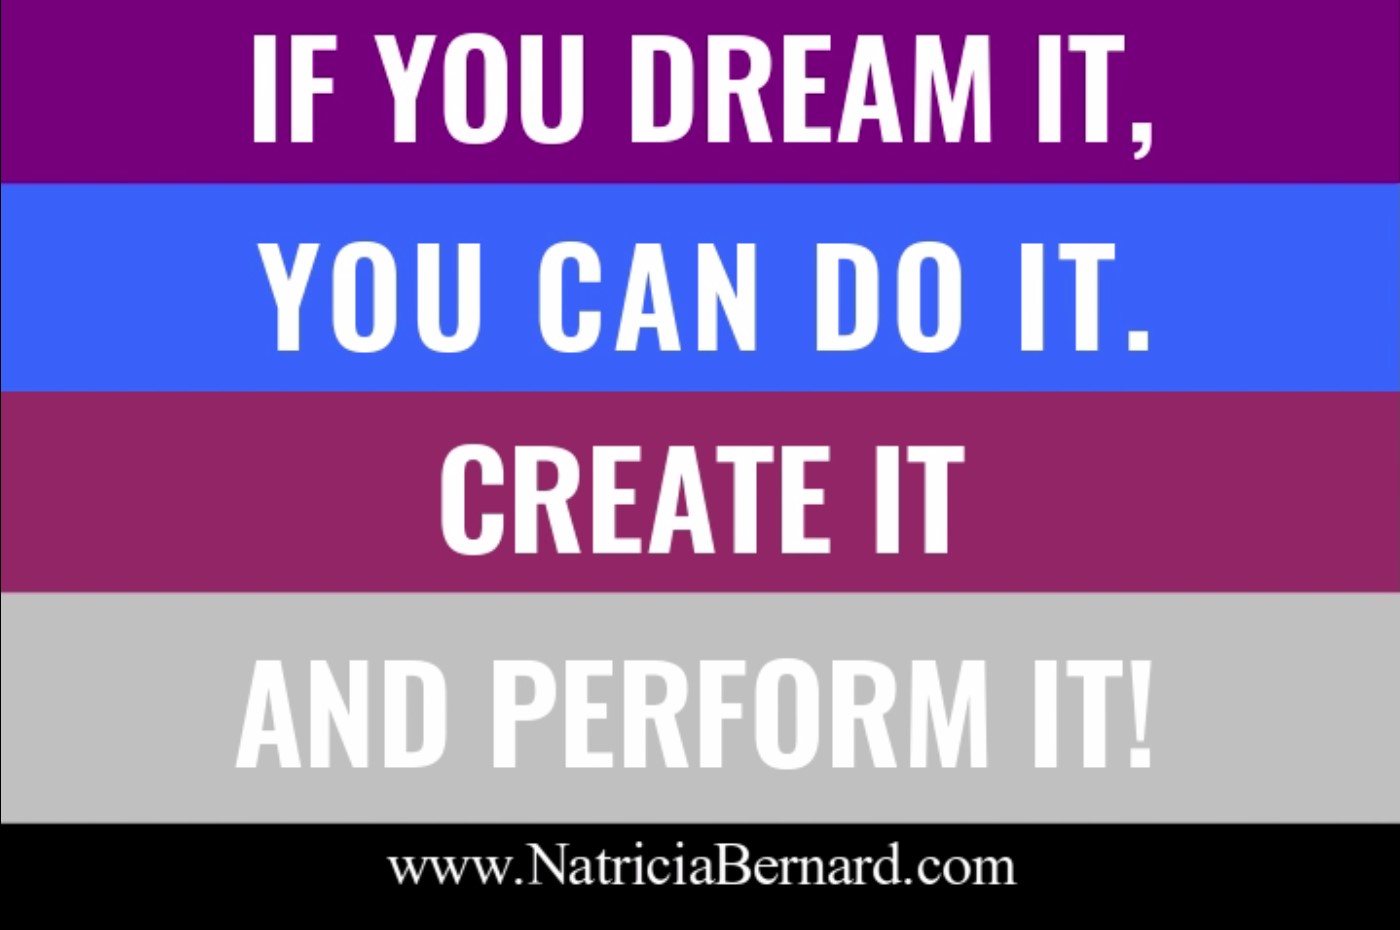 If you dream it, you can do it. Create it and perform it!